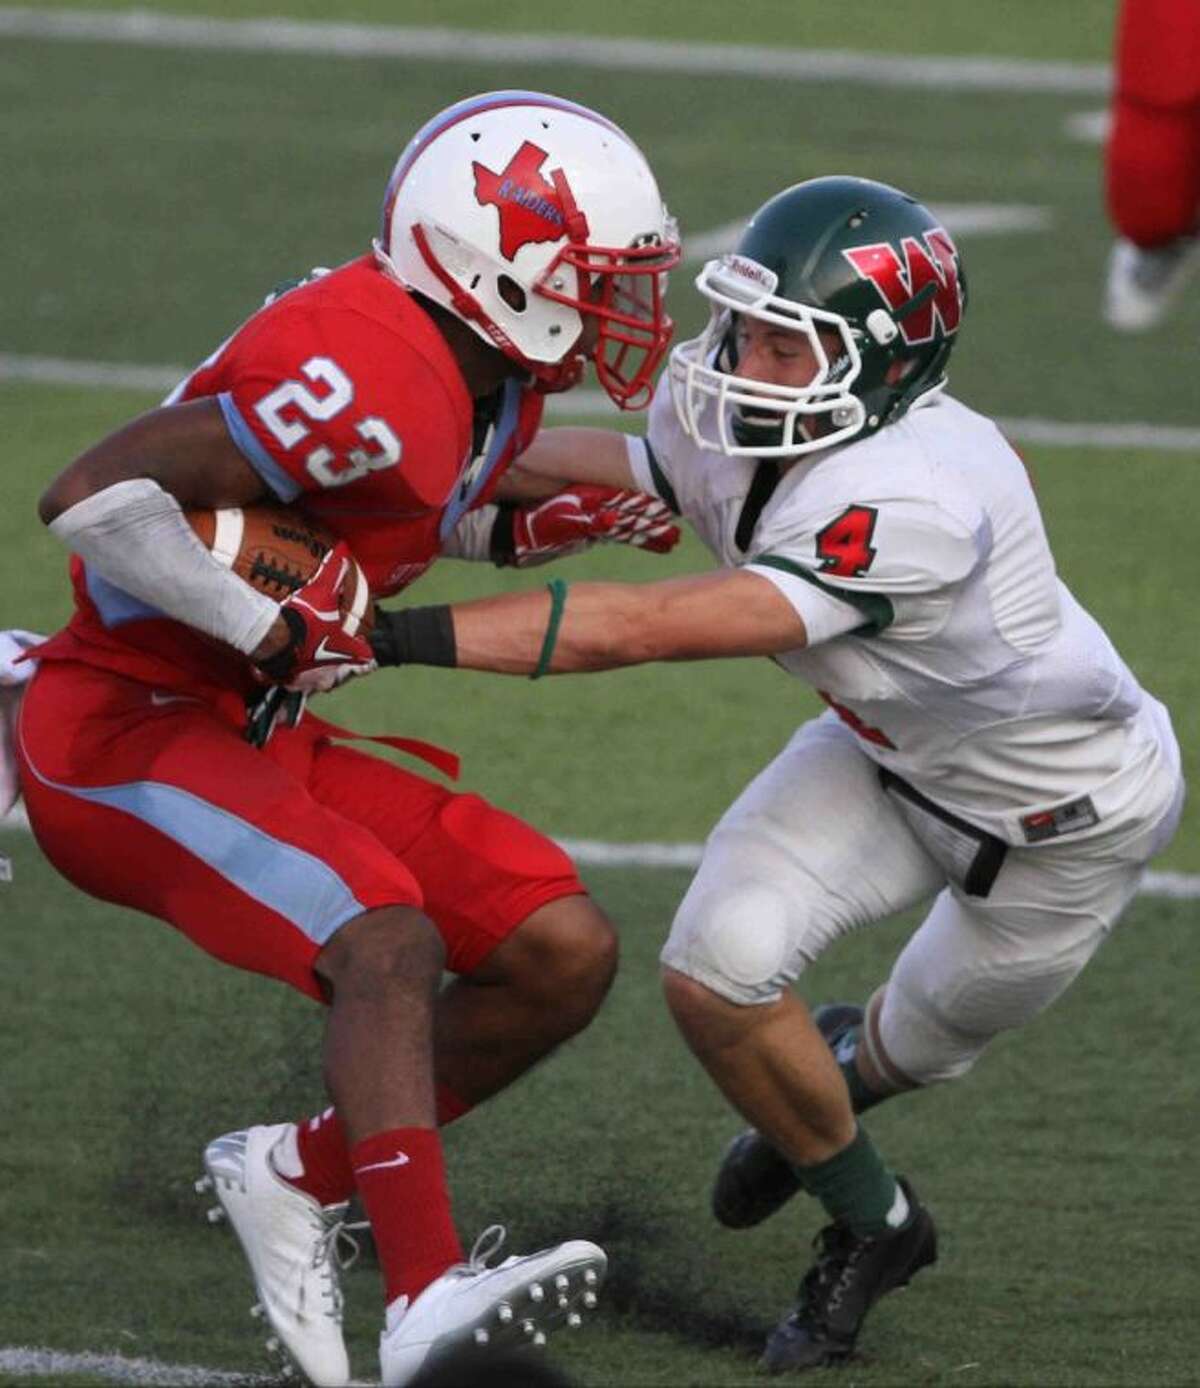 The Woodlands' Tyler Patrick tackles Dallas Skyline's C.J. McGee during a high school football game at Birkelbach Field in Georgetown Saturday. Dallas Skyline defeated The Woodlands 33-30 in overtime. Go to HCNPics.com to view and purchase this photo, and others like it.